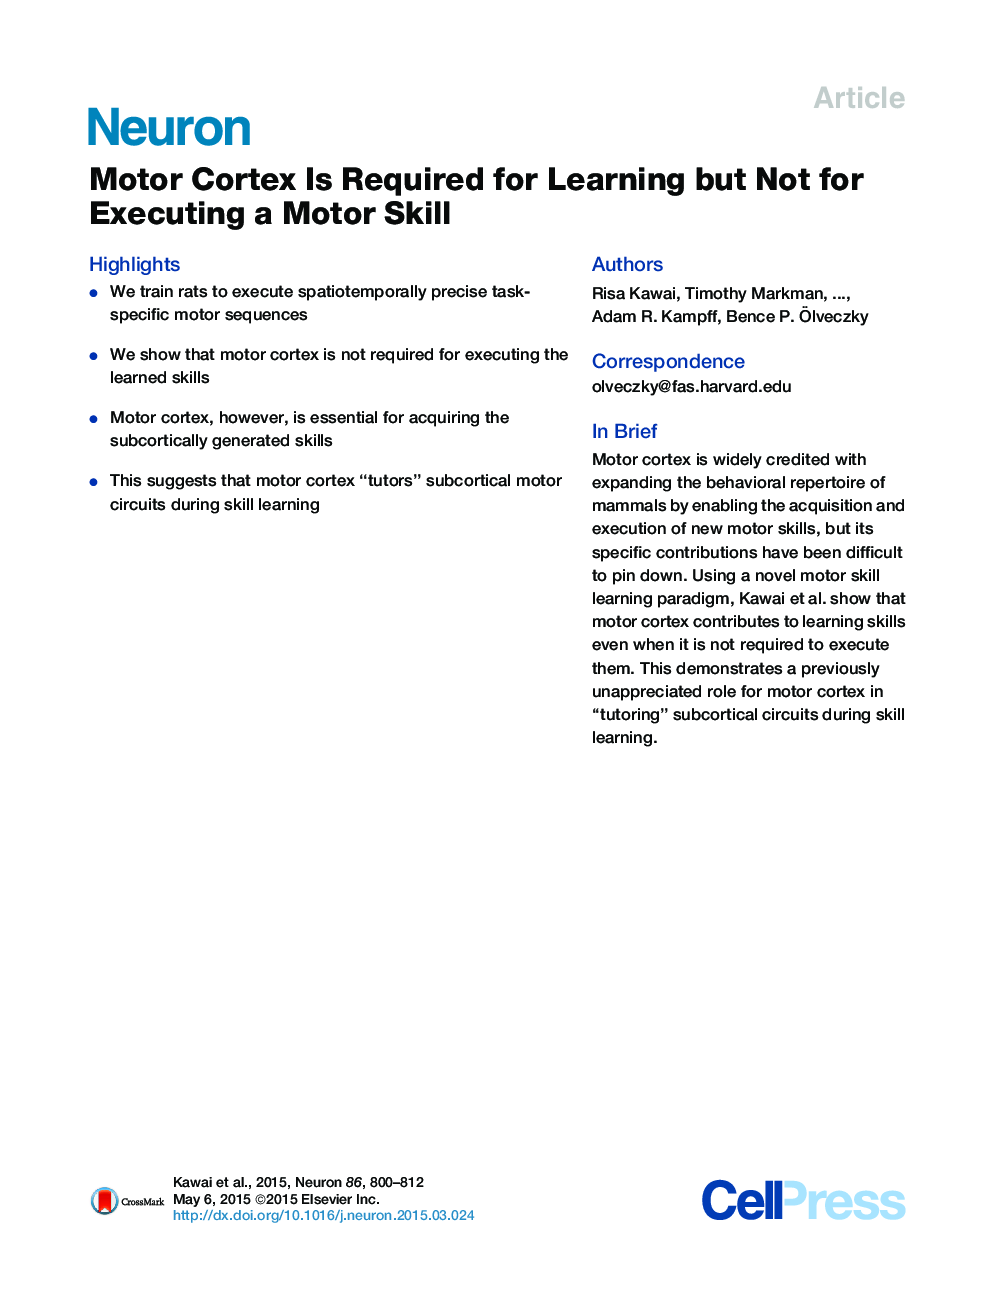 Motor Cortex Is Required for Learning but Not for Executing a Motor Skill